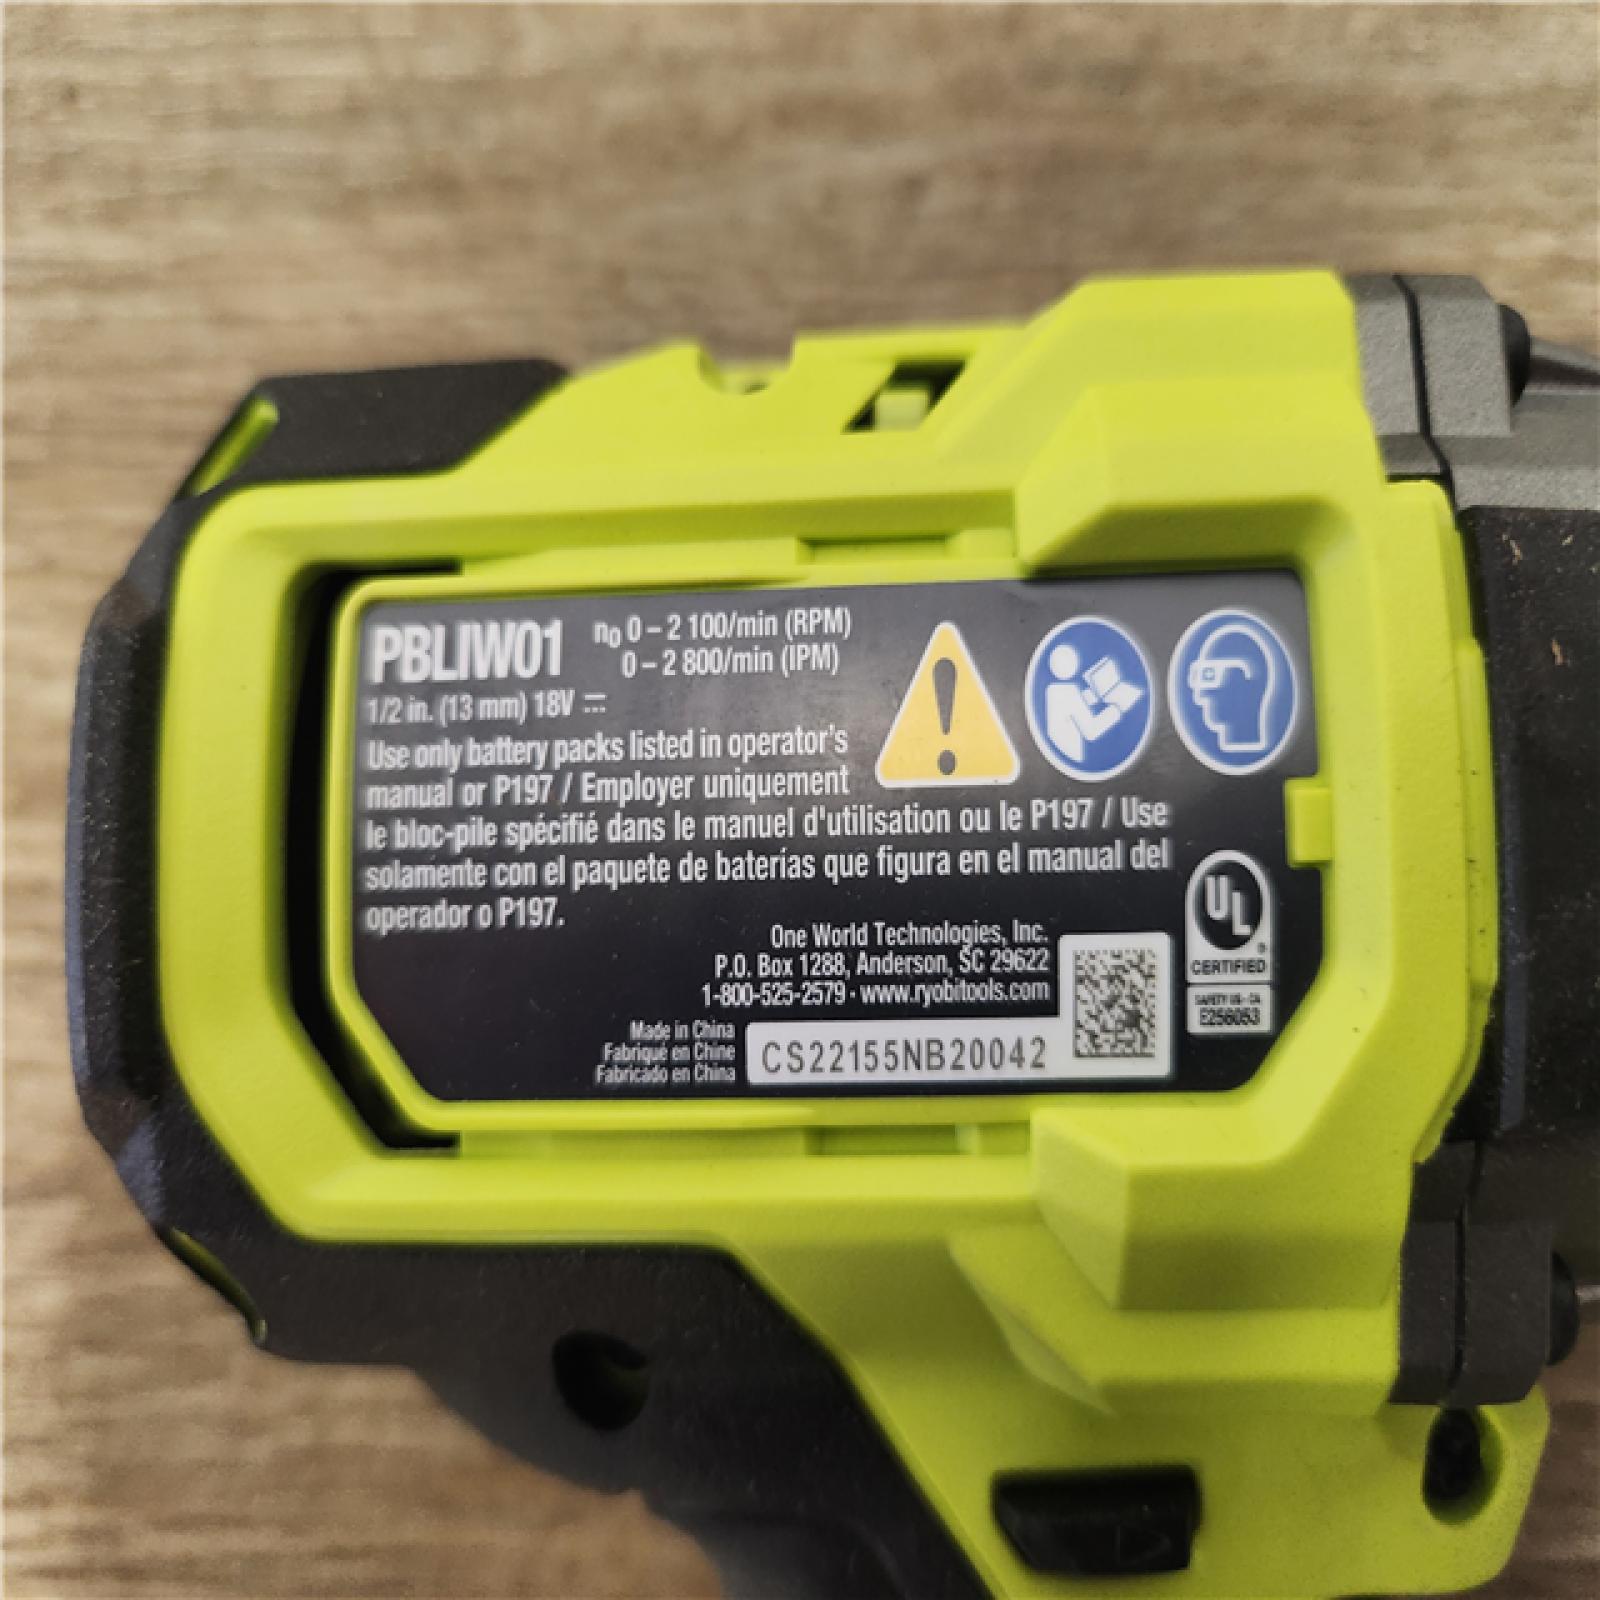 Phoenix Location NEW RYOBI ONE+ HP 18V Brushless Cordless 4-Mode 1/2 in. High Torque Impact Wrench (Tool Only)